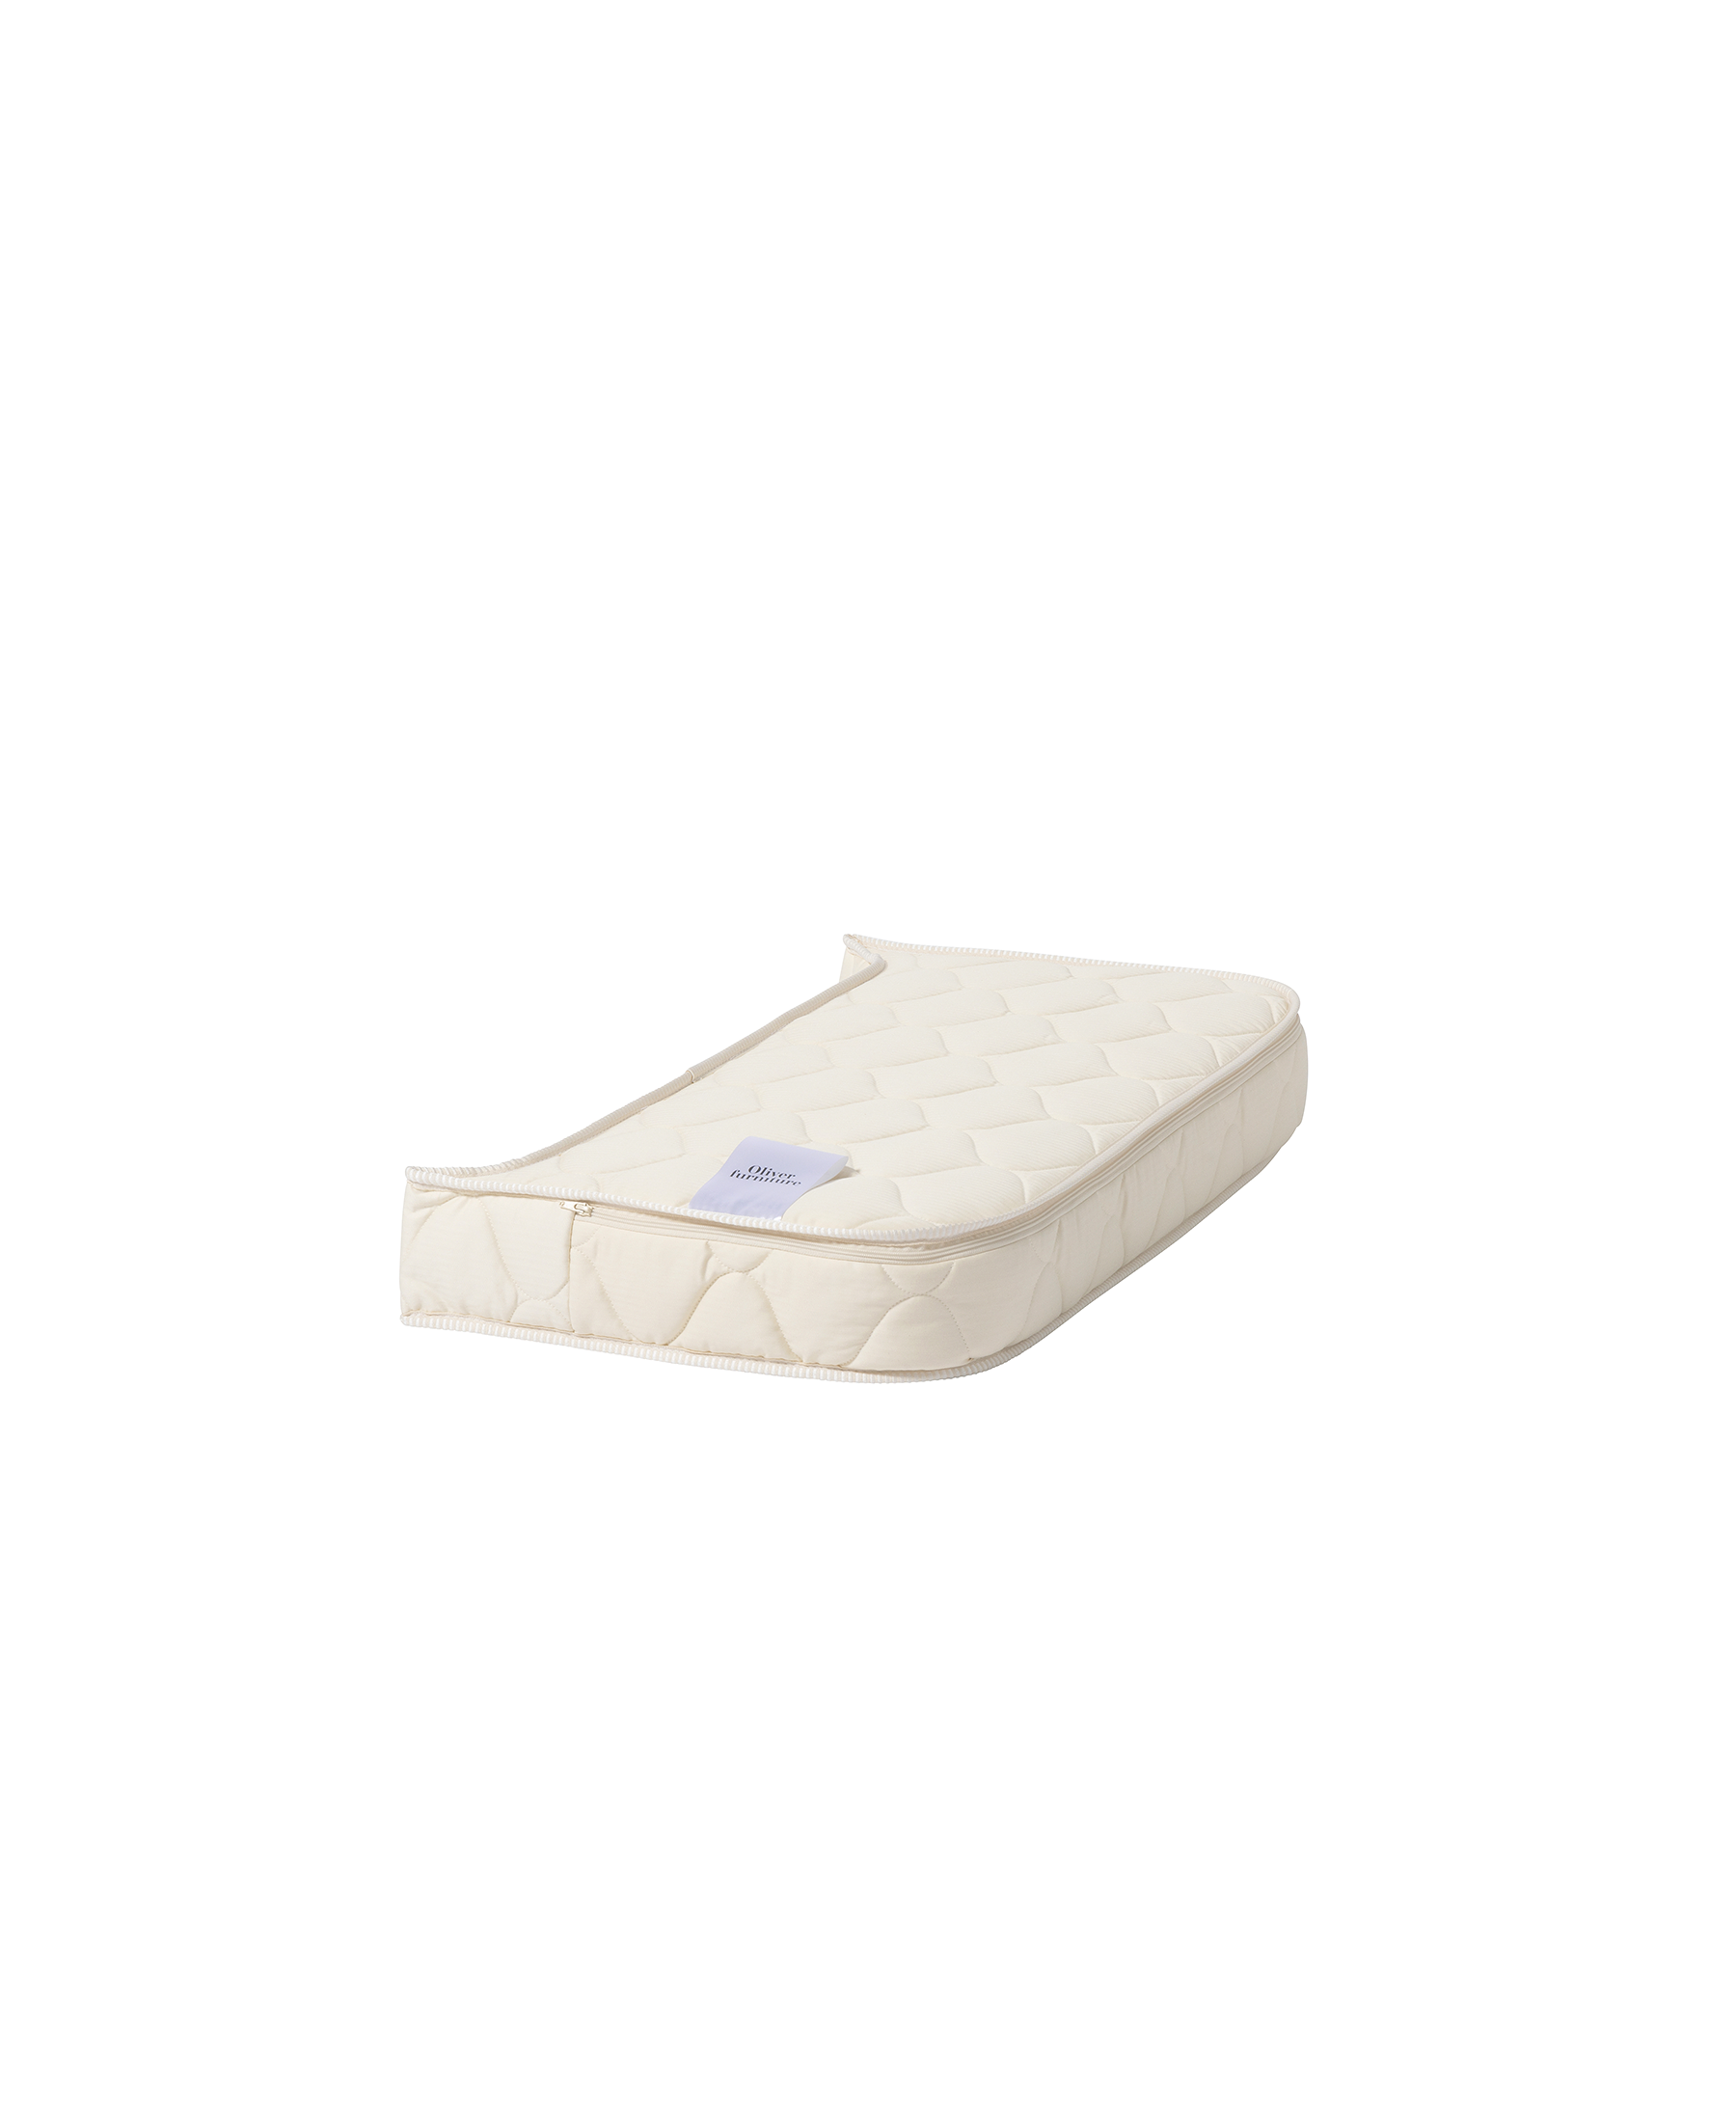 Oliver Furniture Mattress Extension for Wood junior bed to single (160-200cm)